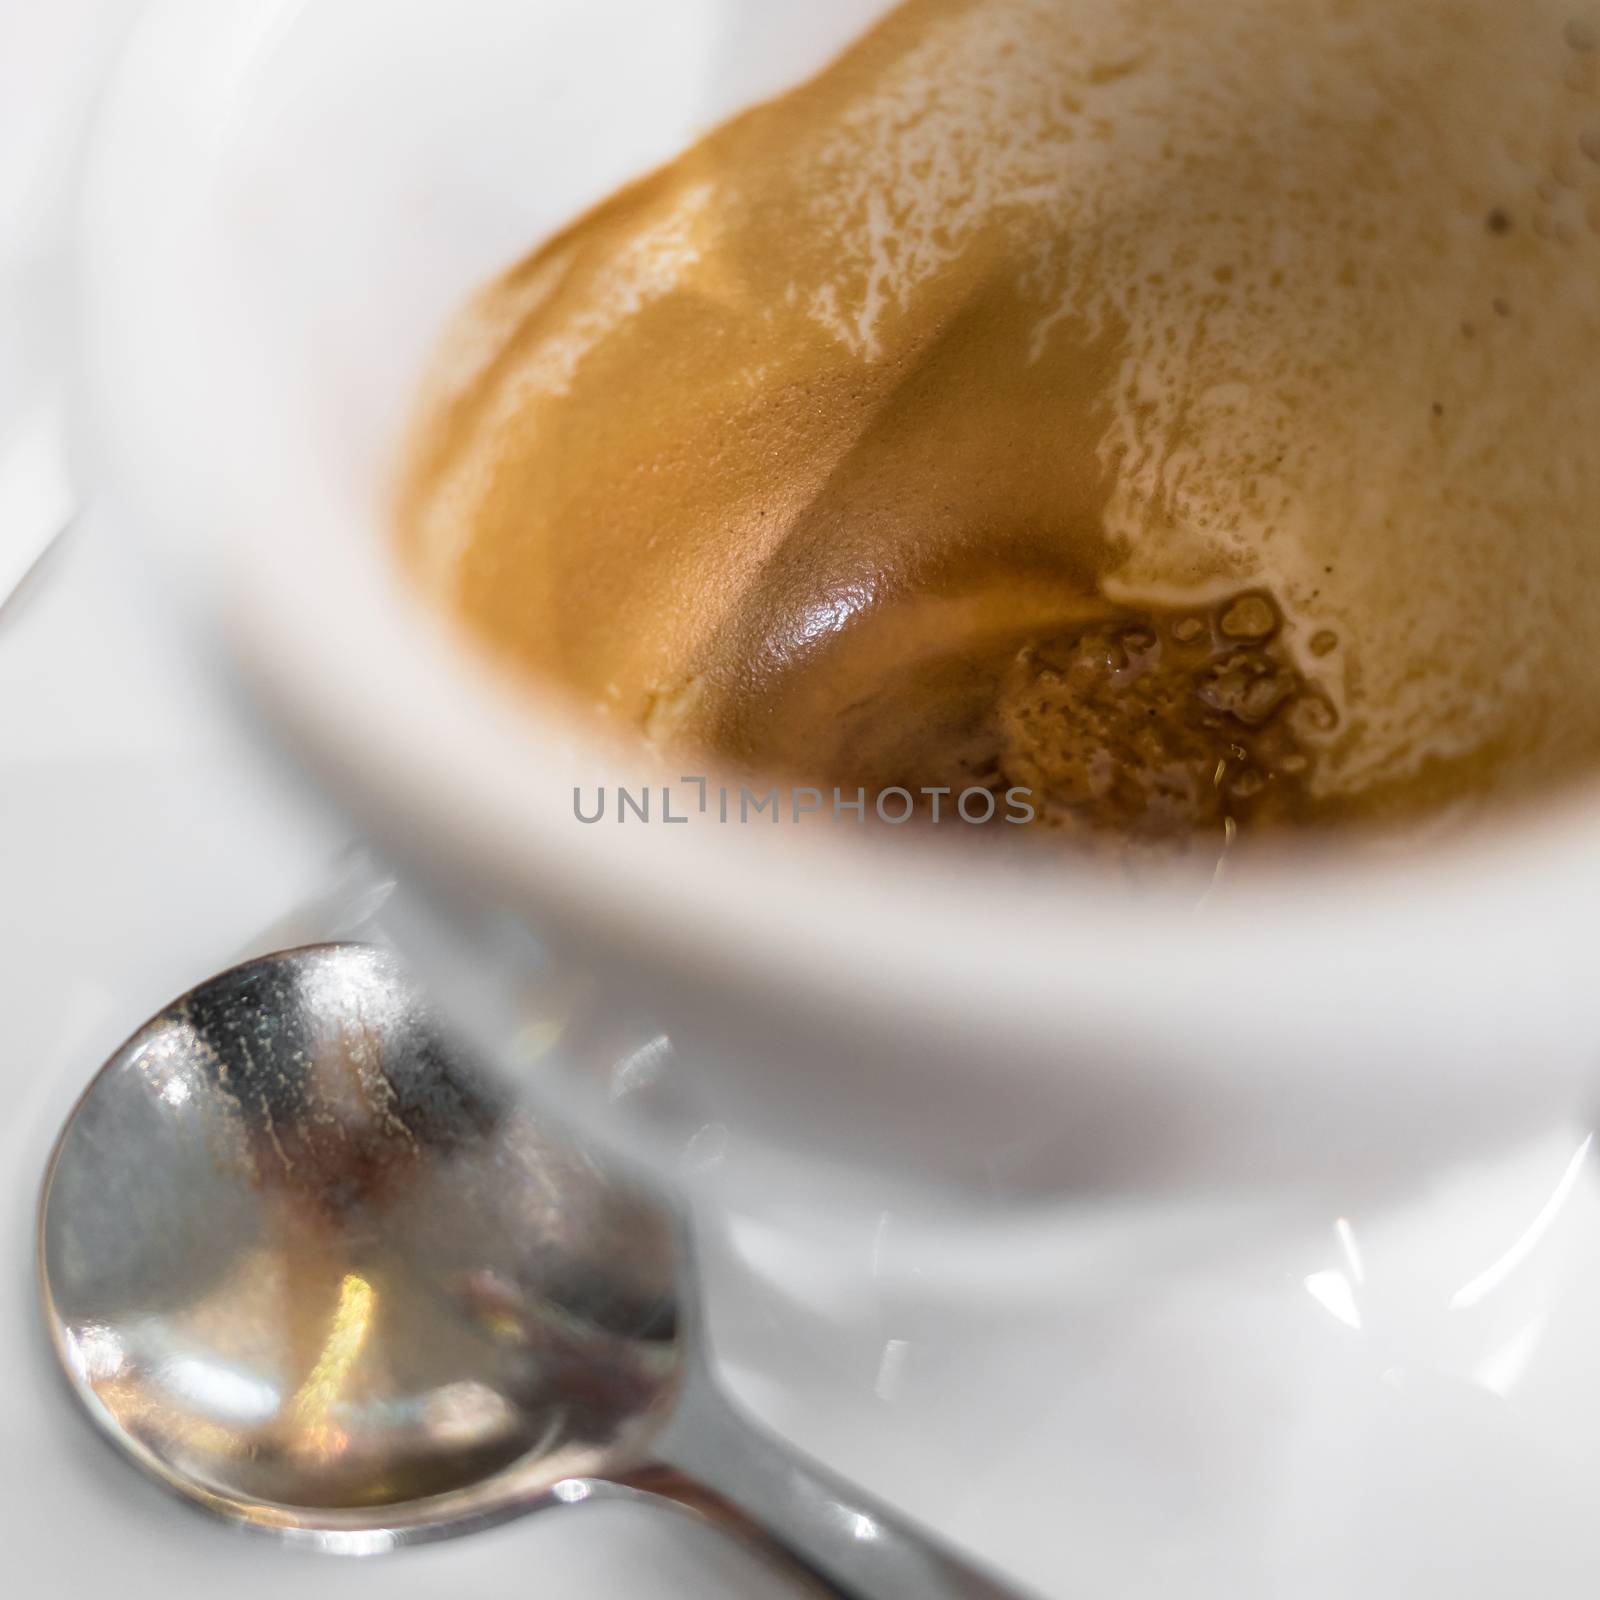 Coffee cup after drank. Cup of coffee that has been drank. Close-up. Shallow DOF.